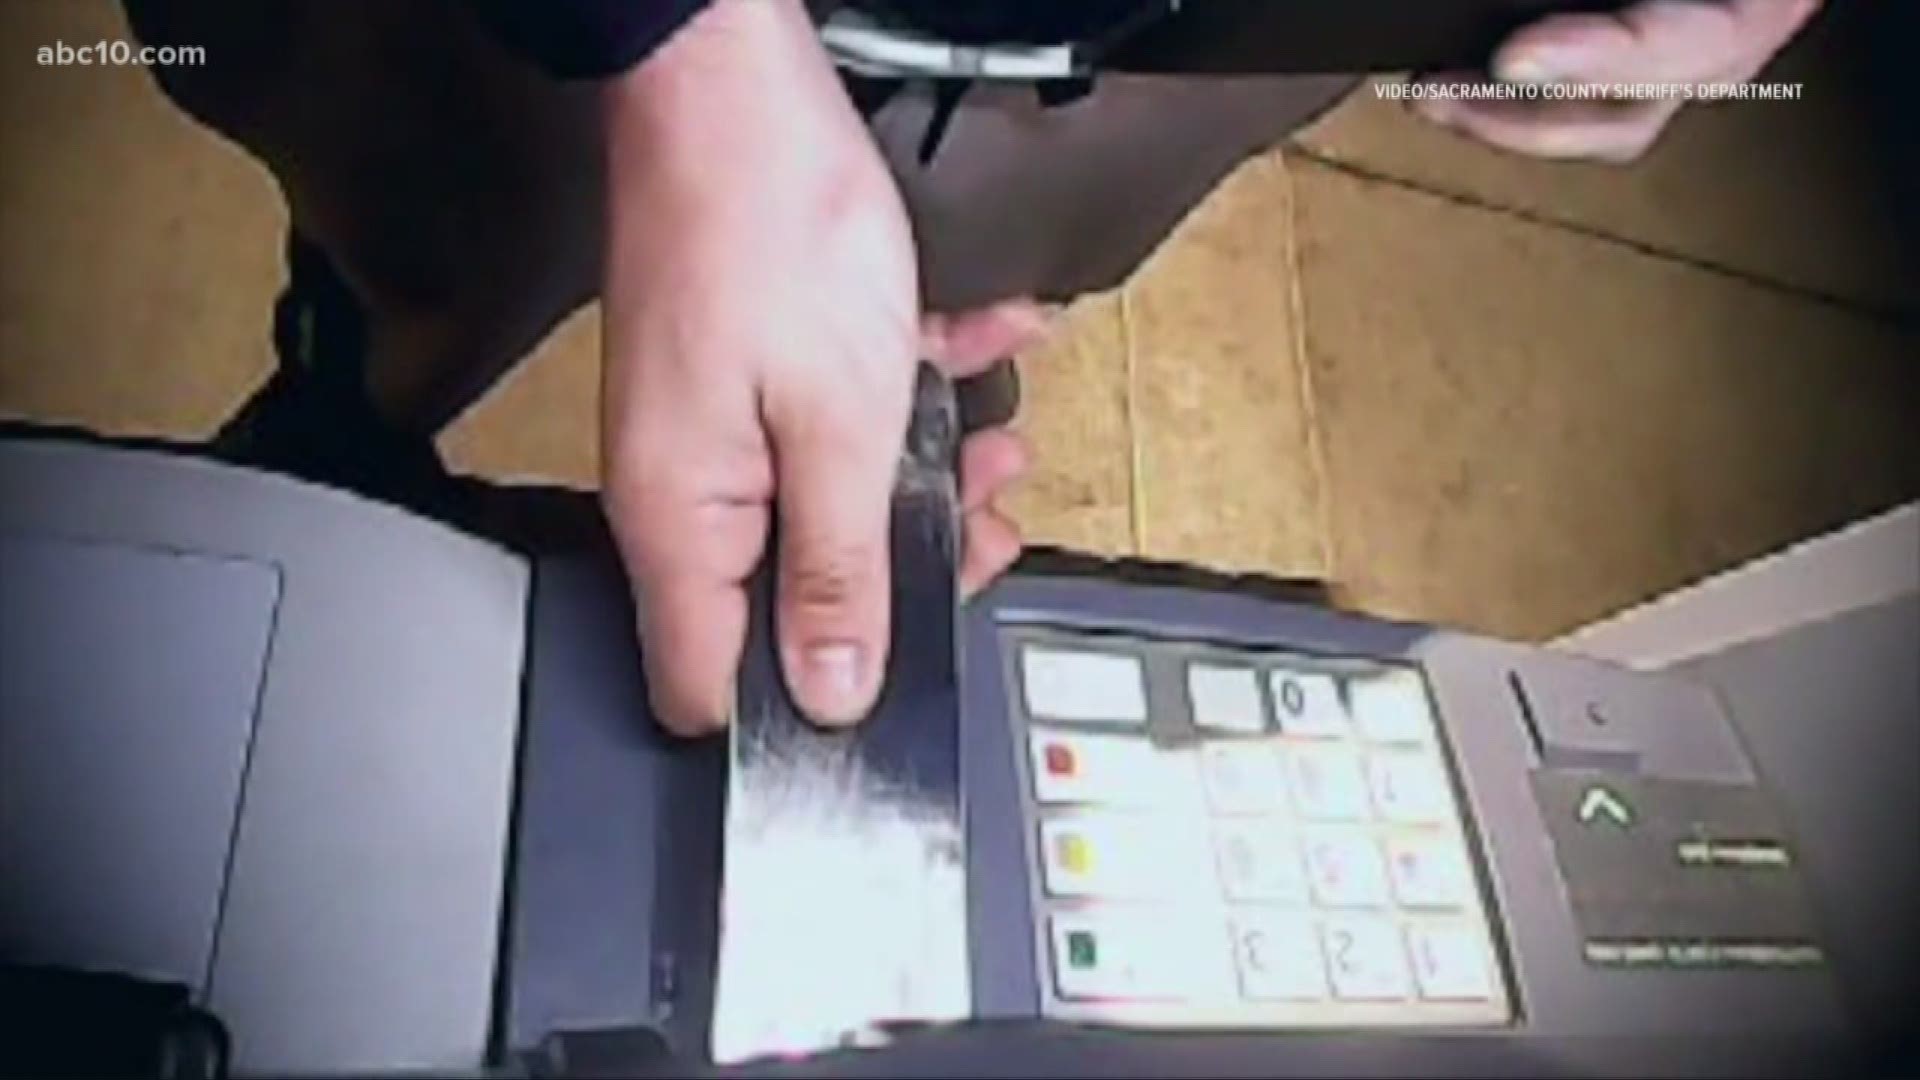 After the four men were arrested for an alleged credit card skimming ring spanning from Sacramento to Reno, an expert in cyber security shows how you can stay safe and protect your money from these illegal ATM skimming devices.